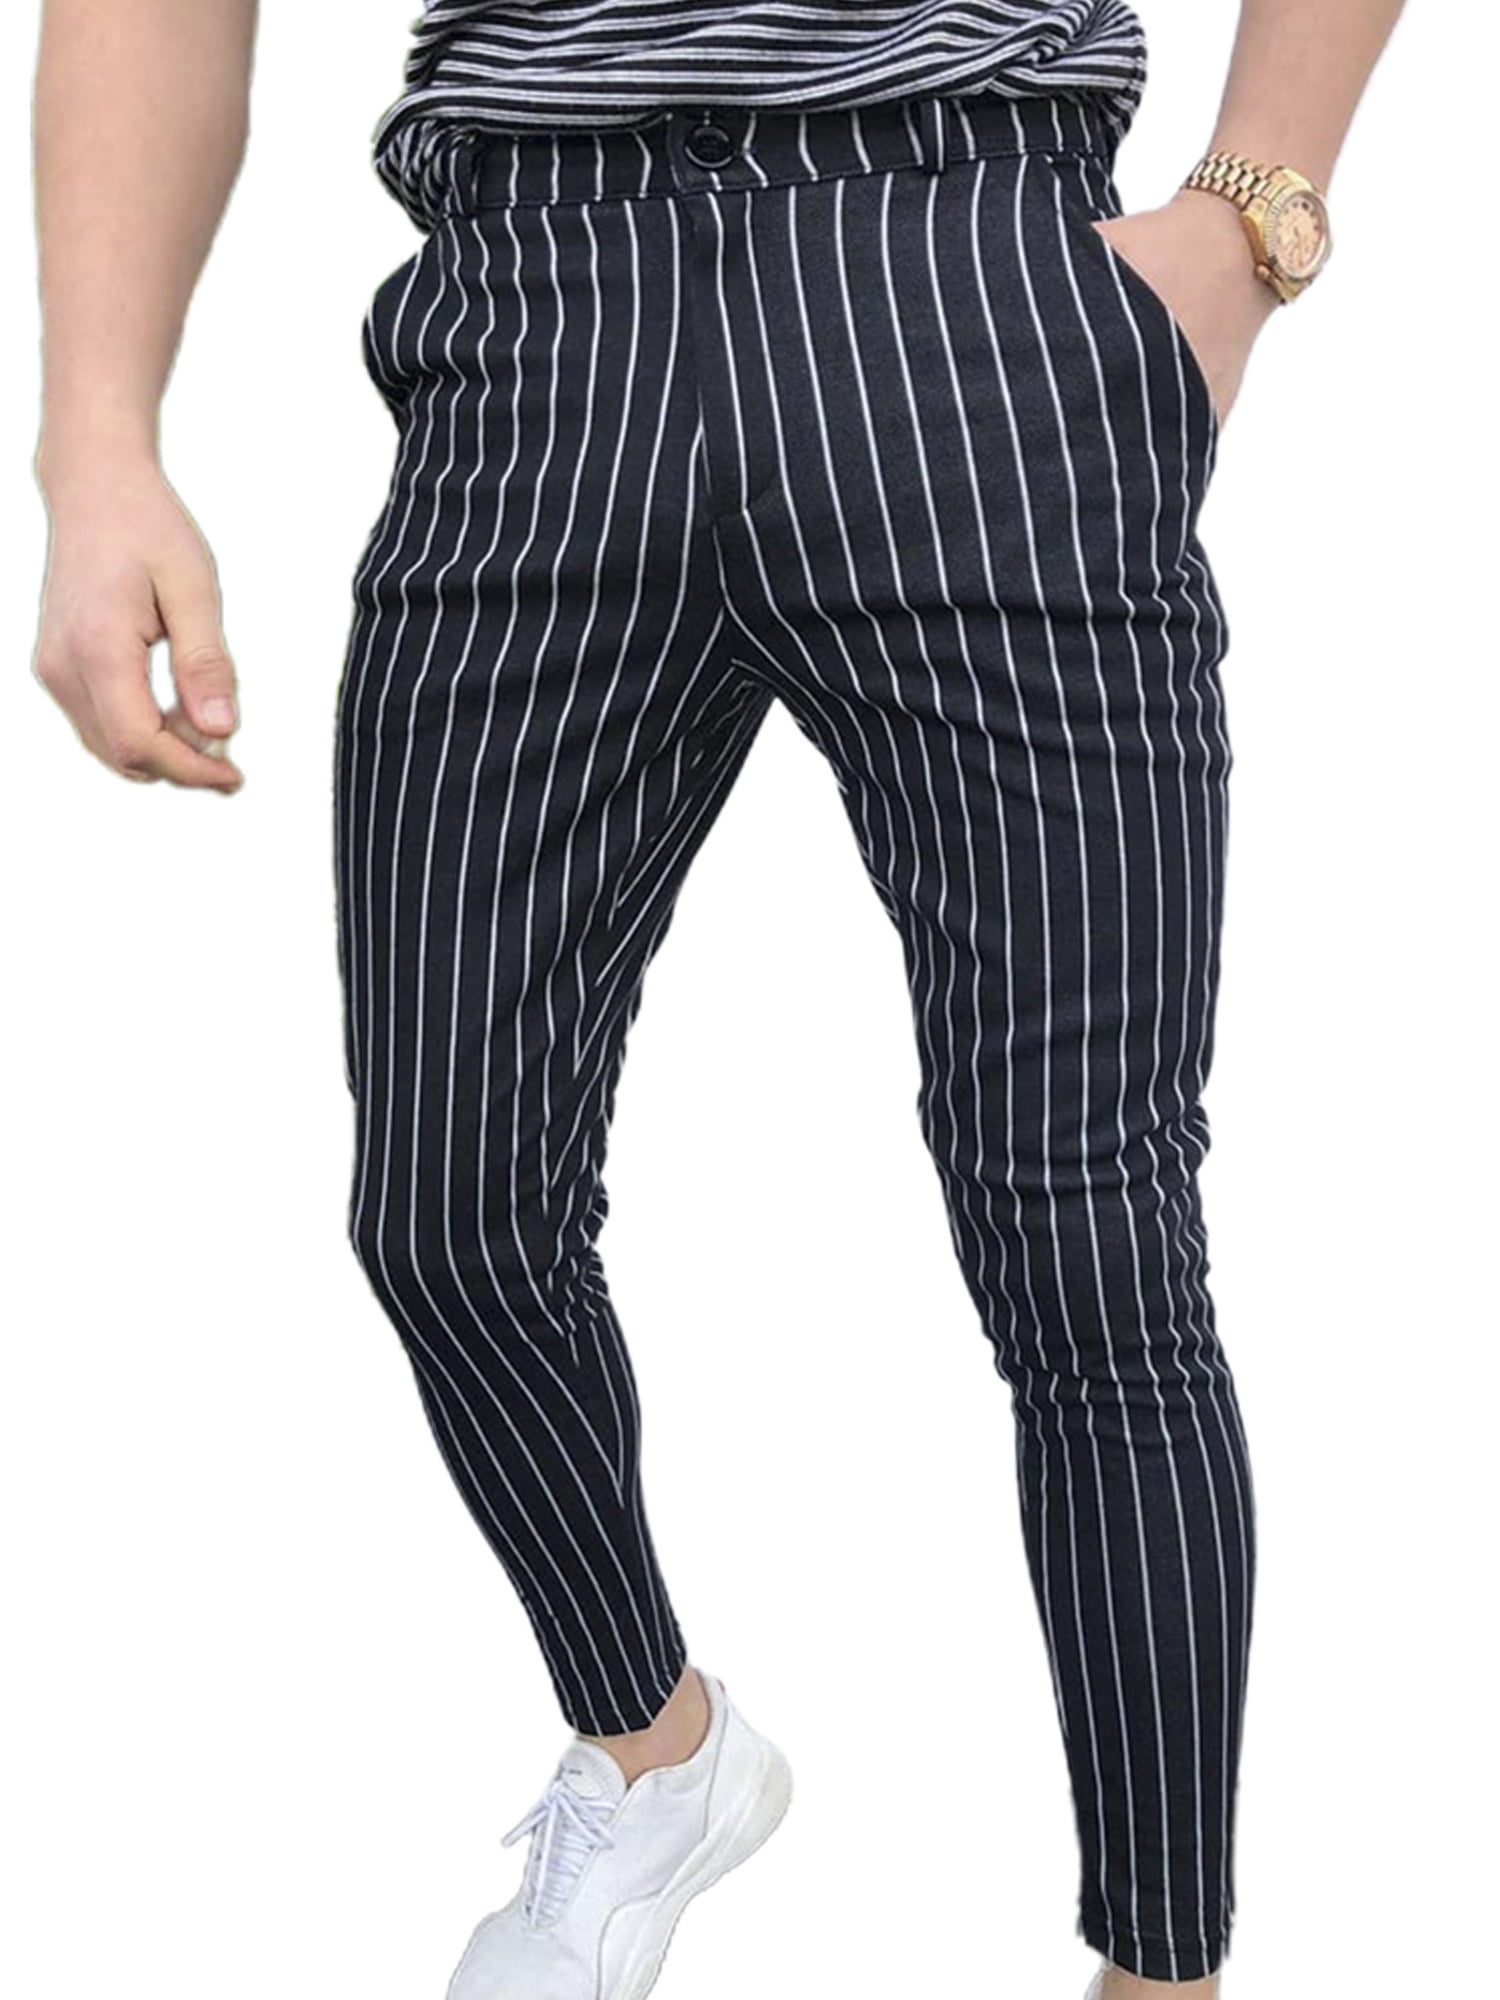 Mens Casual Striped Pants Fomal Party Dress Slimming Trousers - Walmart.com